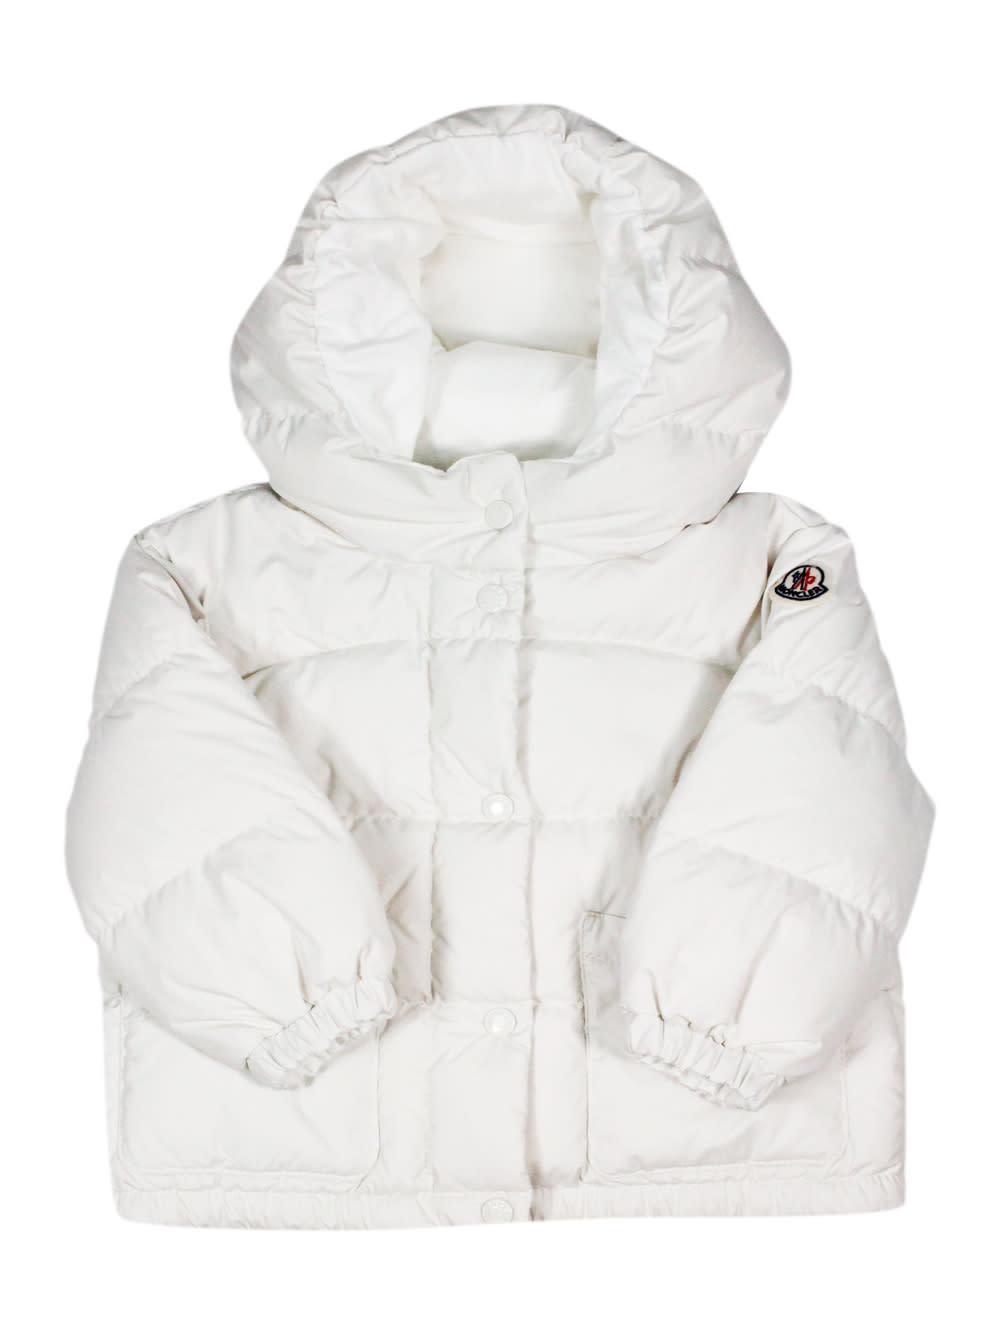 Shop Moncler Ebre Down Jacket Padded With Real White Goose Down With Hood, Zip And Snap Button Closure And Front 